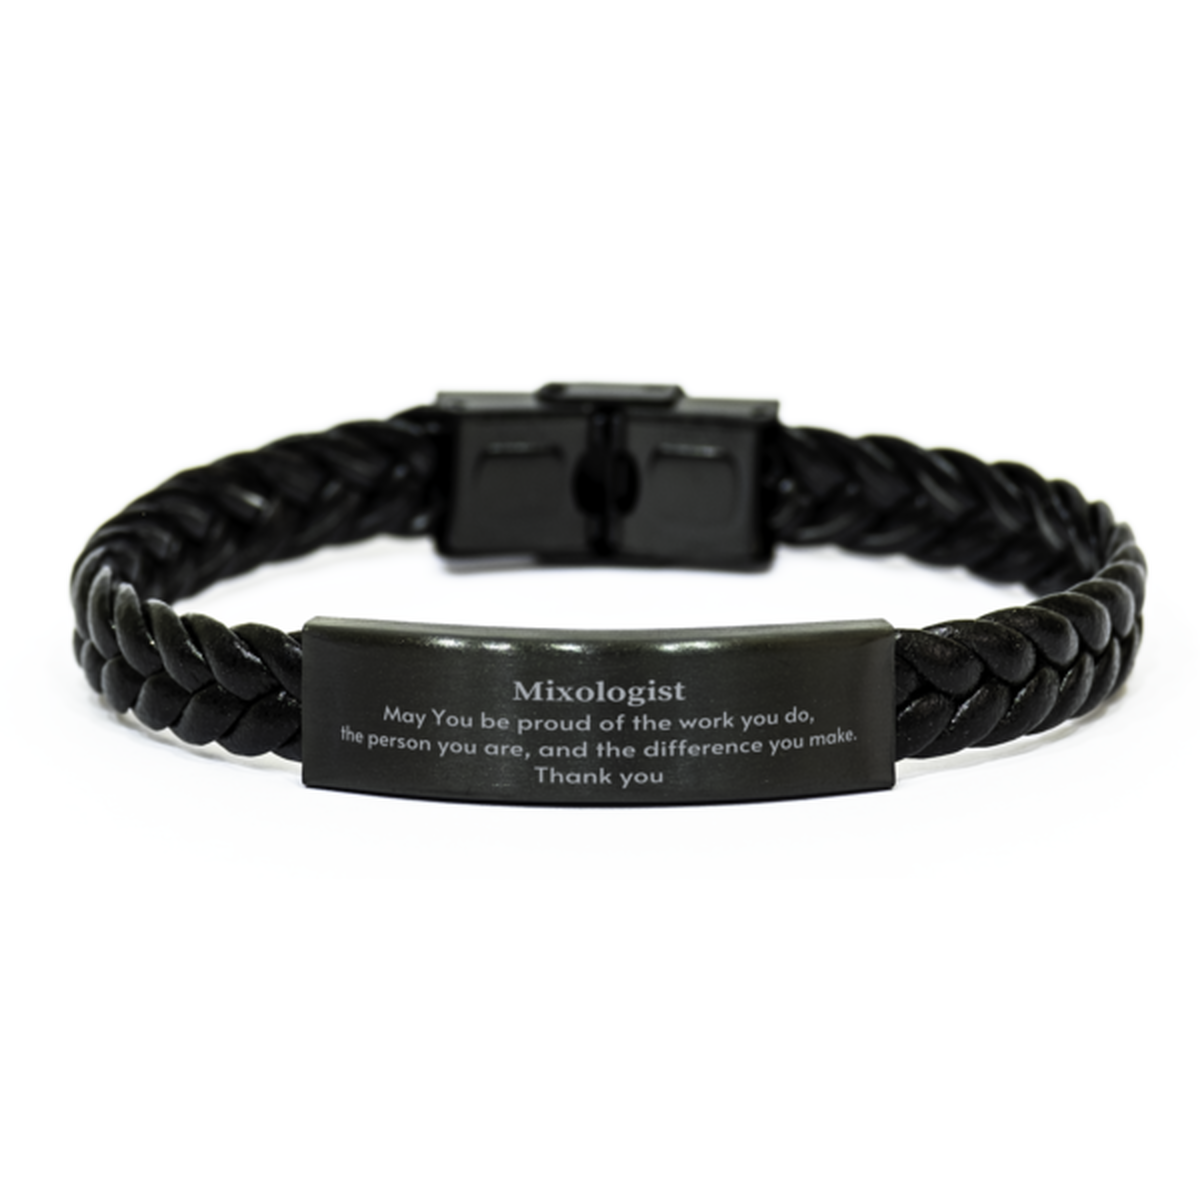 Heartwarming Braided Leather Bracelet Retirement Coworkers Gifts for Mixologist, Mixologist May You be proud of the work you do, the person you are Gifts for Boss Men Women Friends